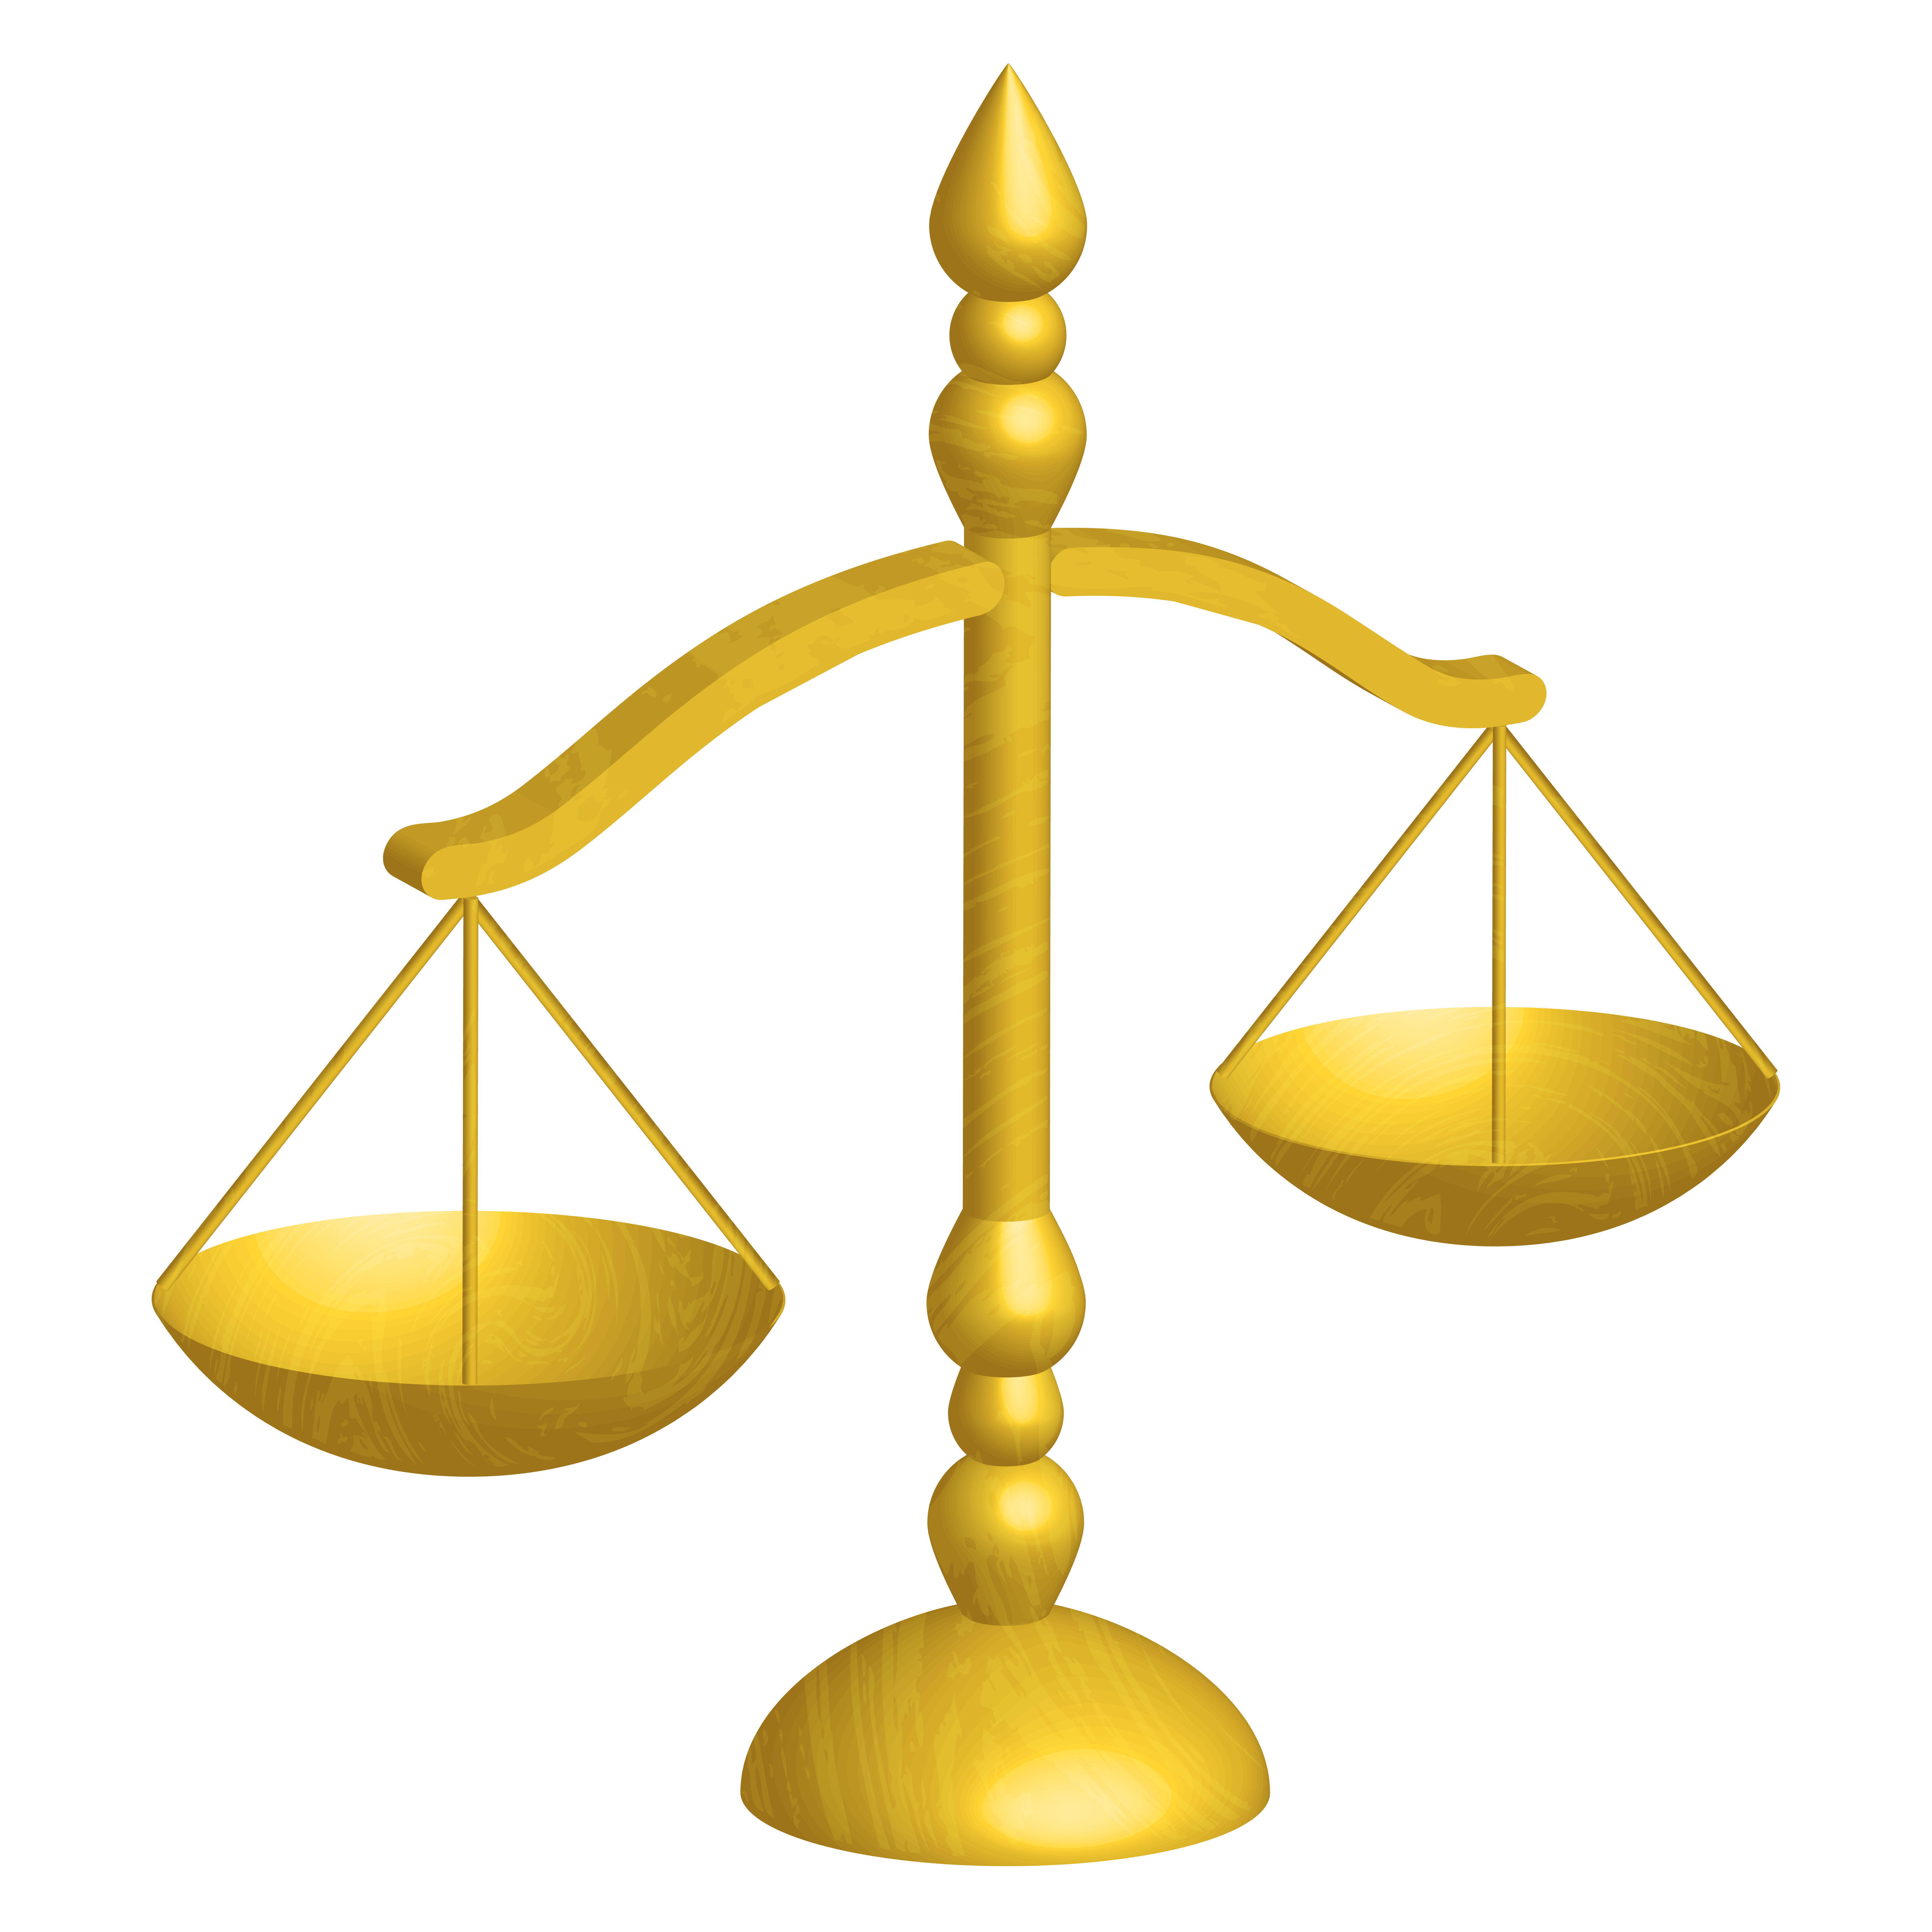 Justice Scales Clip Art - Clipart library